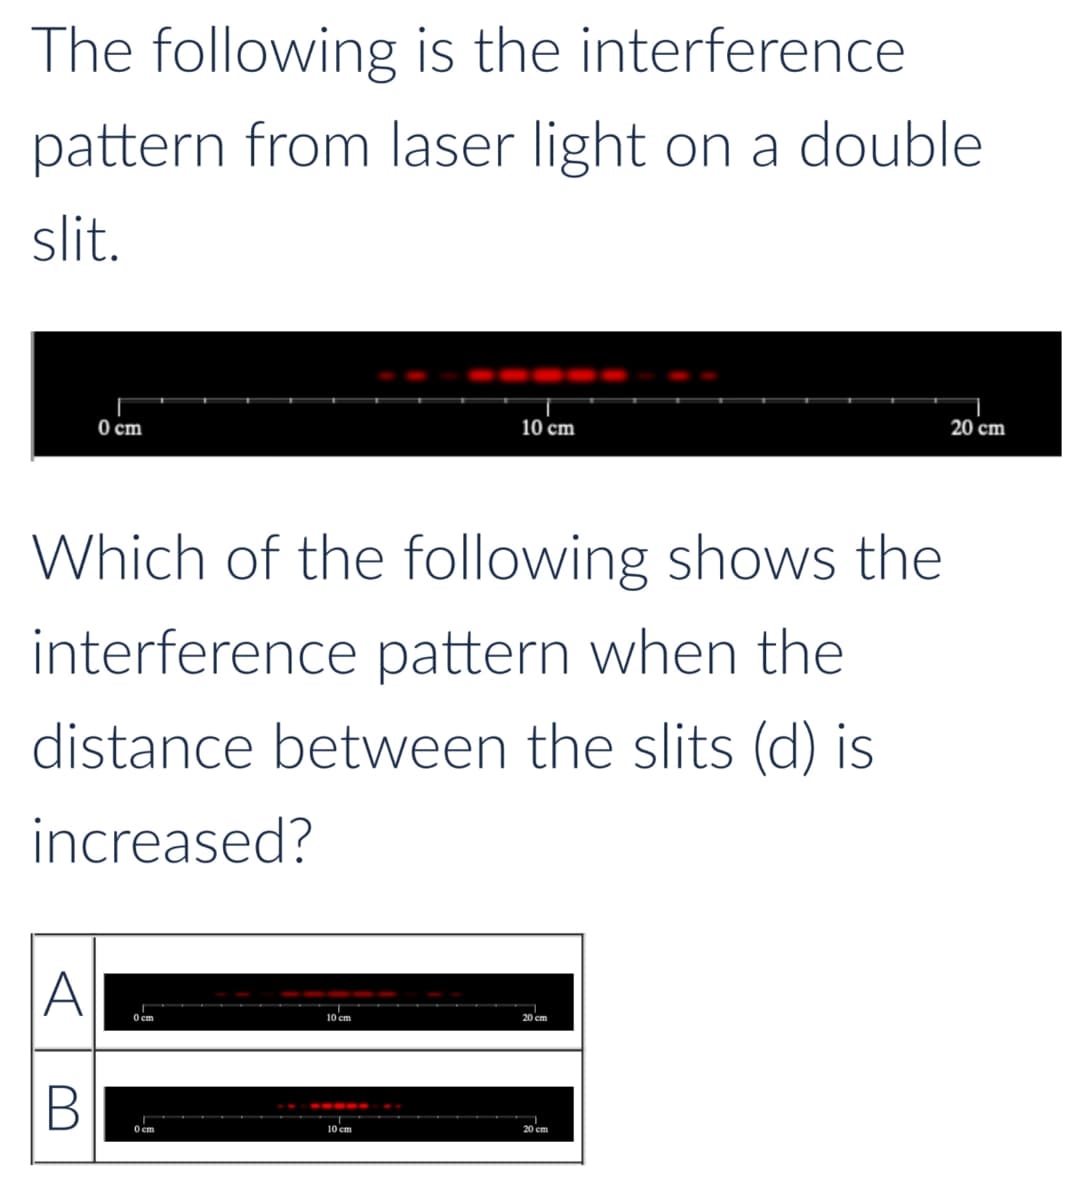 The following is the
interference
pattern from laser light on a double
slit.
0 cm
10 cm
Which of the following shows the
interference pattern when the
distance between the slits (d) is
increased?
A
B
0 cm
0 cm
10 cm
20 cm
10 cm
20 cm
20 cm